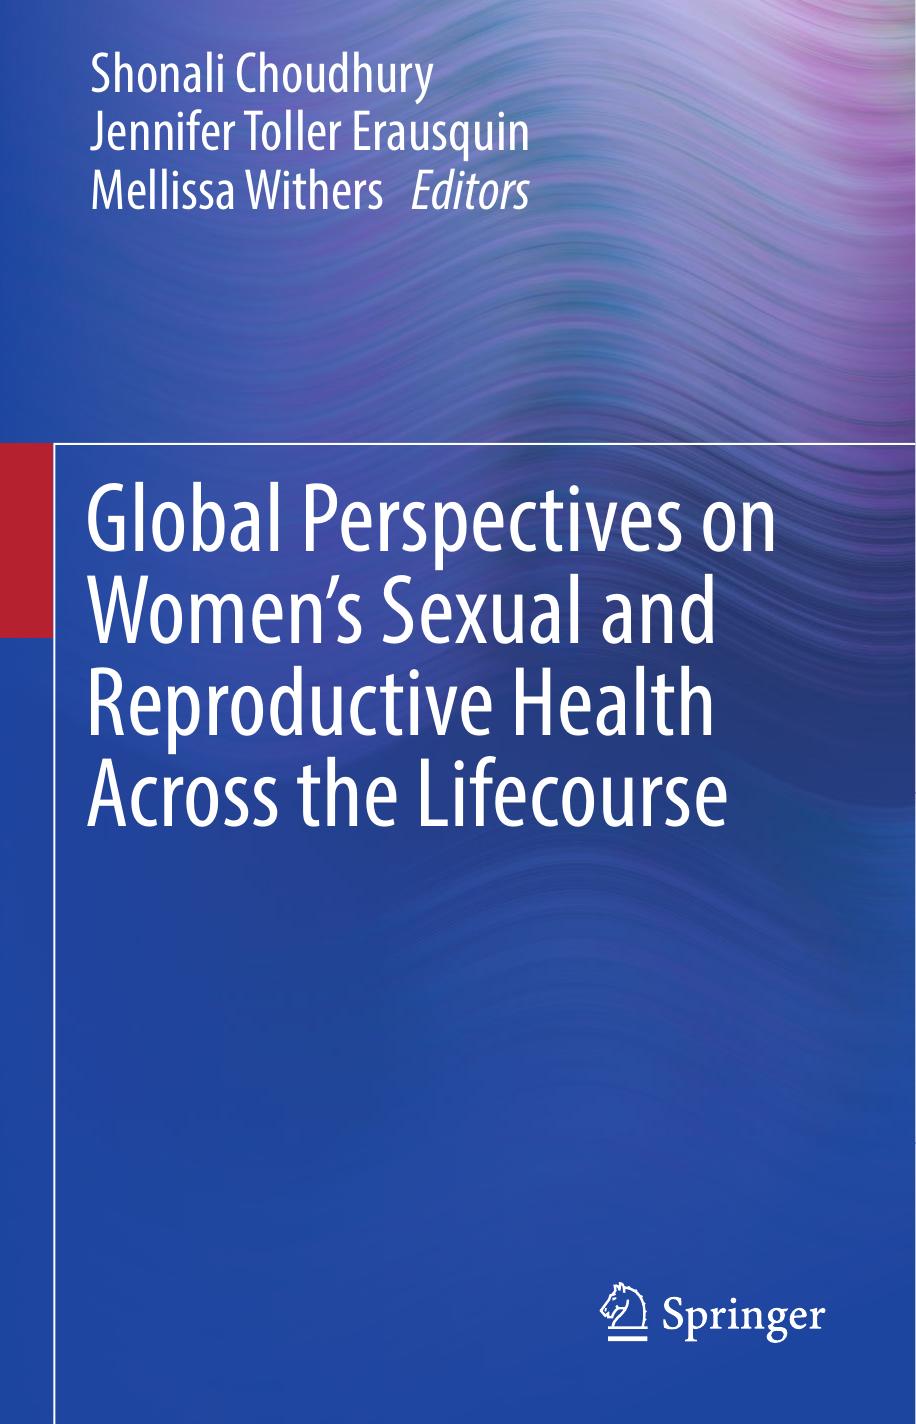 Global perspectives on women's sexual and reproductive health across the lifecourse 2018